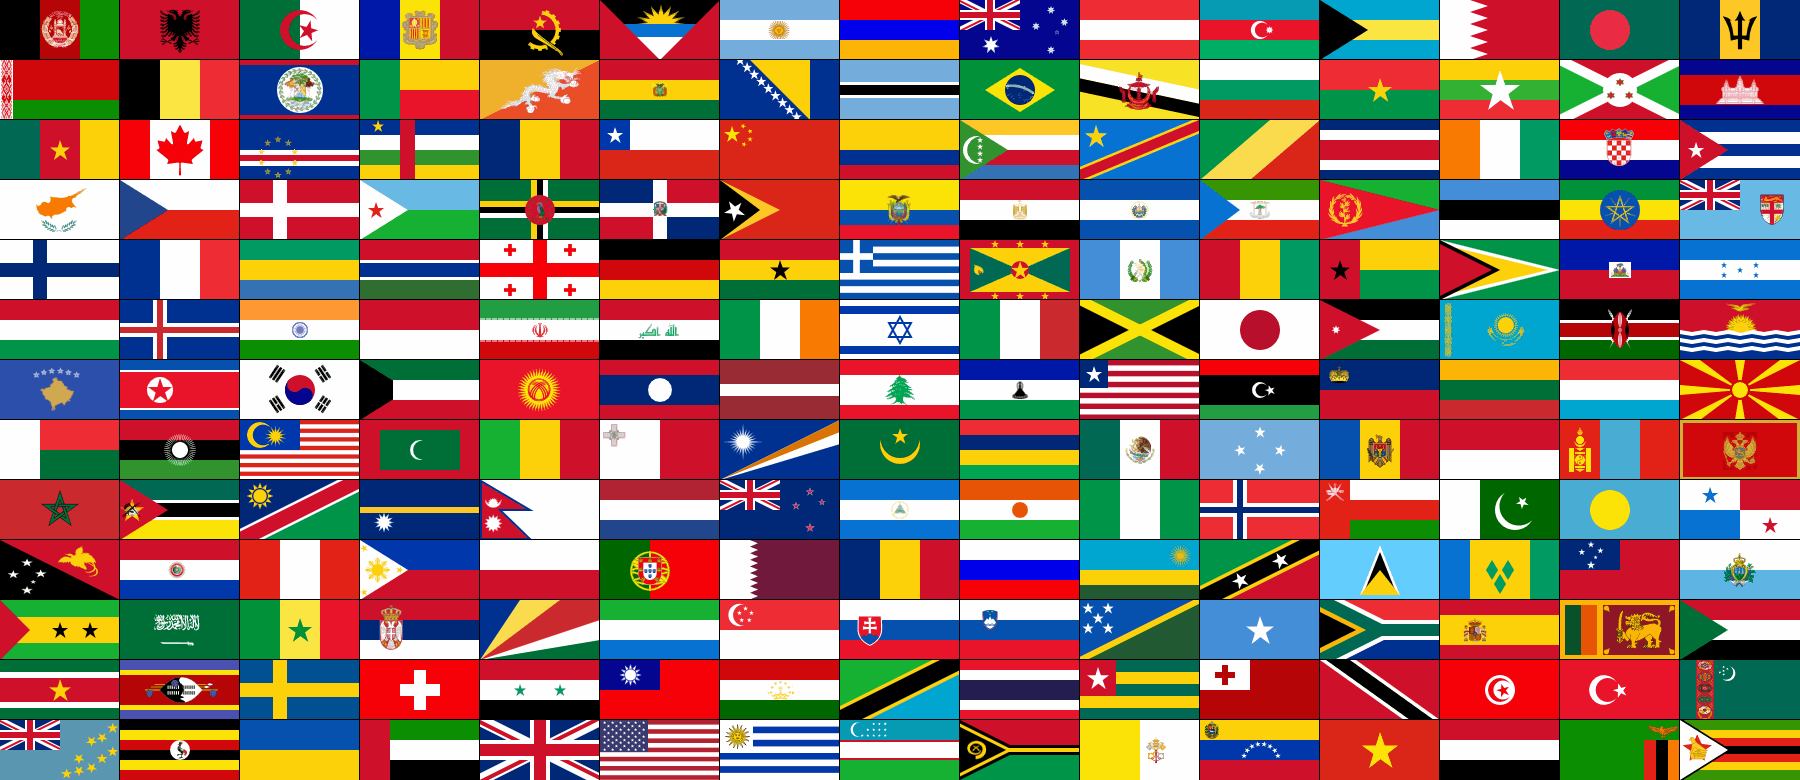 Flags Of The World Wallpapers Wallpaper Cave - Riset